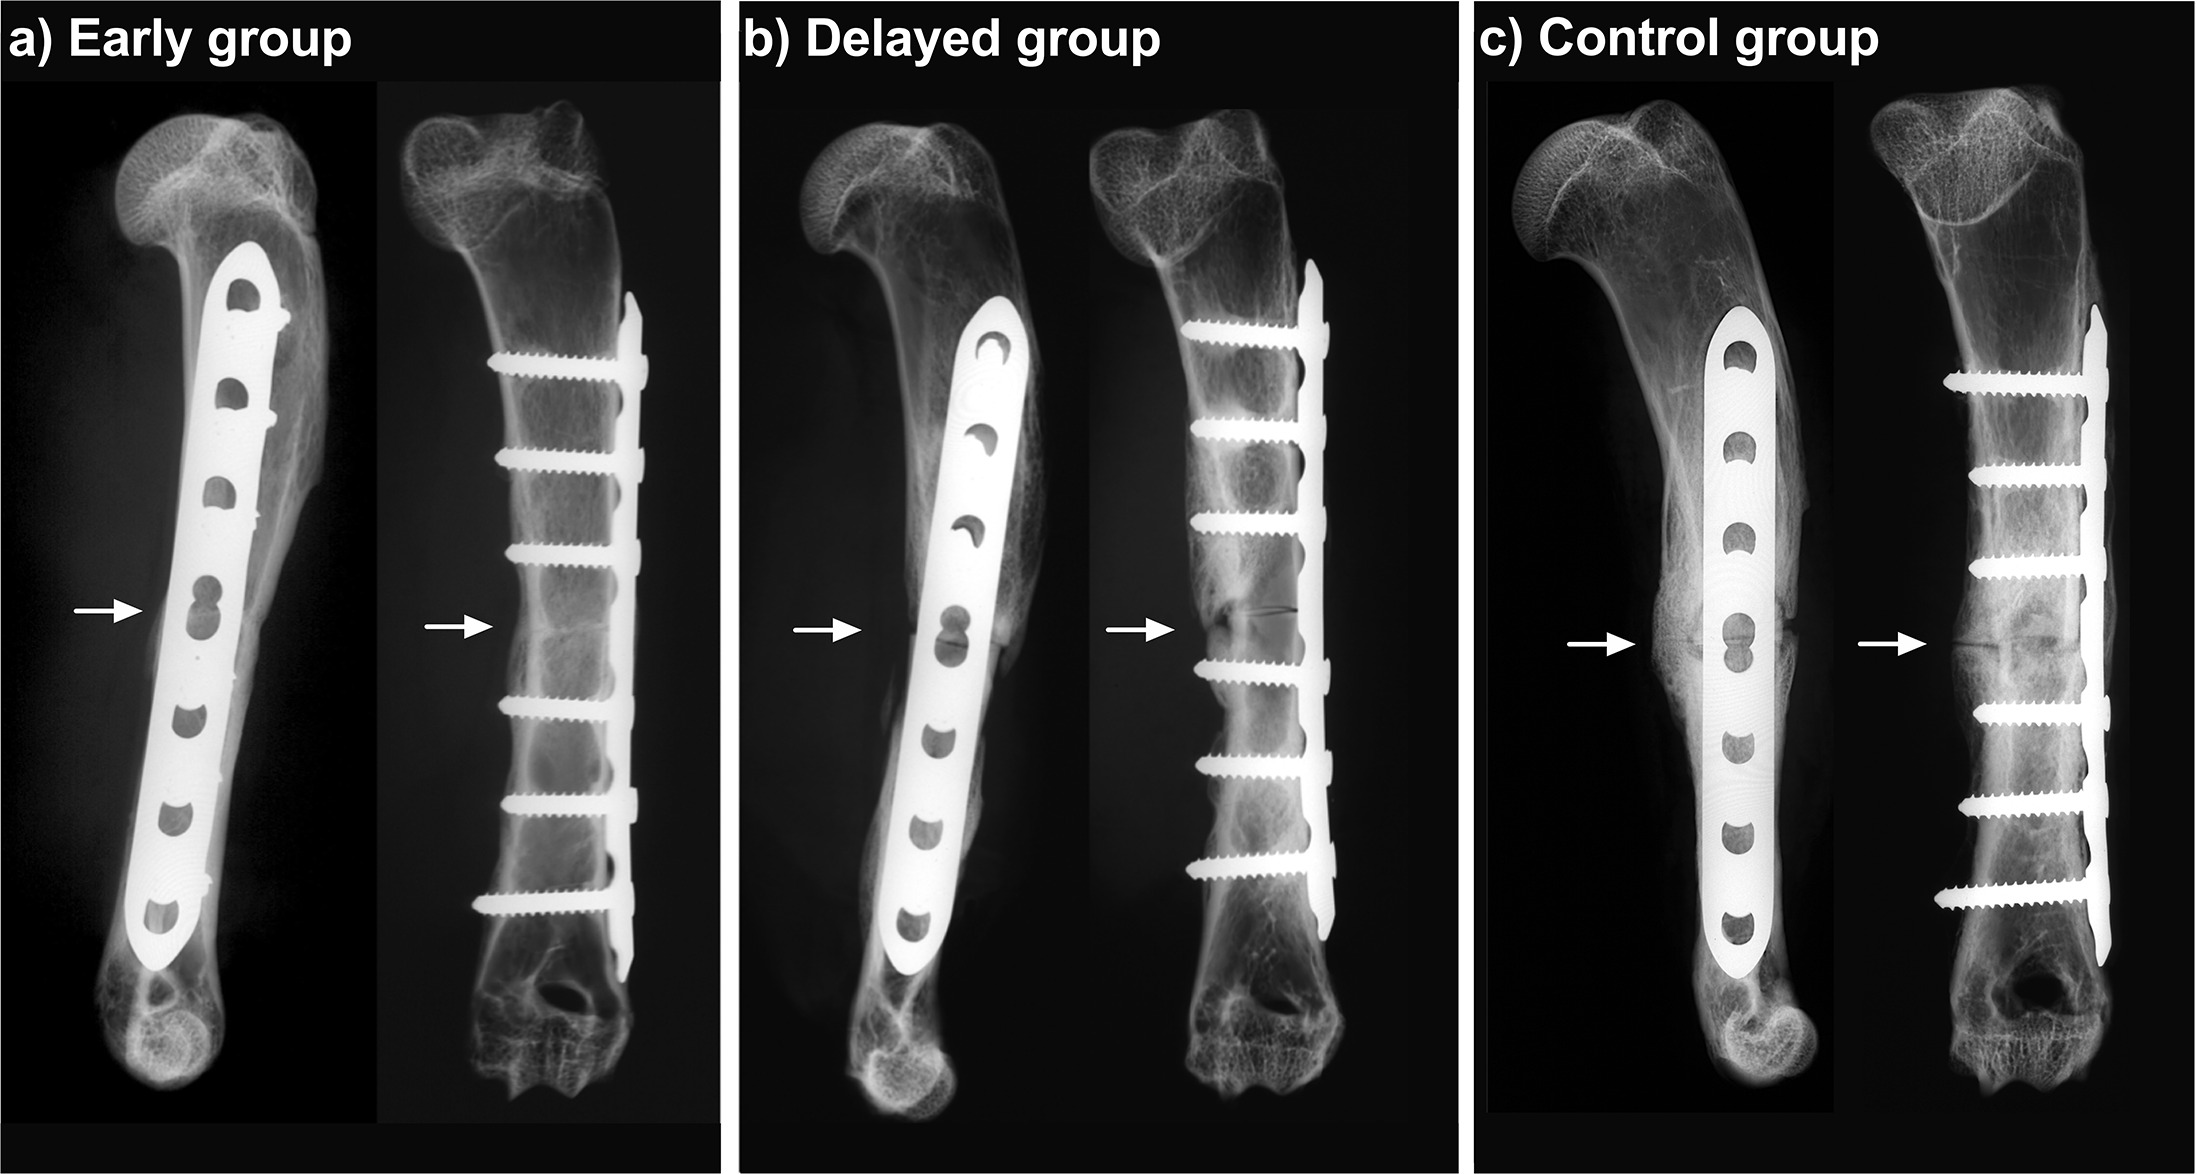 Fig. 5 
            Representative contact radiographs in anteroposterior and lateral view of the rabbit humerus after euthanasia, with arrows marking the osteotomy site in: a) the early group at eight weeks; b) the delayed group at 11 weeks; and c) the control group at 11 weeks. All rabbits received a plate osteosynthesis of a humeral osteotomy and were inoculated with Staphylococcus aureus. Debridement and irrigation with implant retention was performed after one week (early) or after four weeks (delayed and control). The early and delayed groups received systemic antibiotics for six weeks, and the control group received no systemic treatment.
          